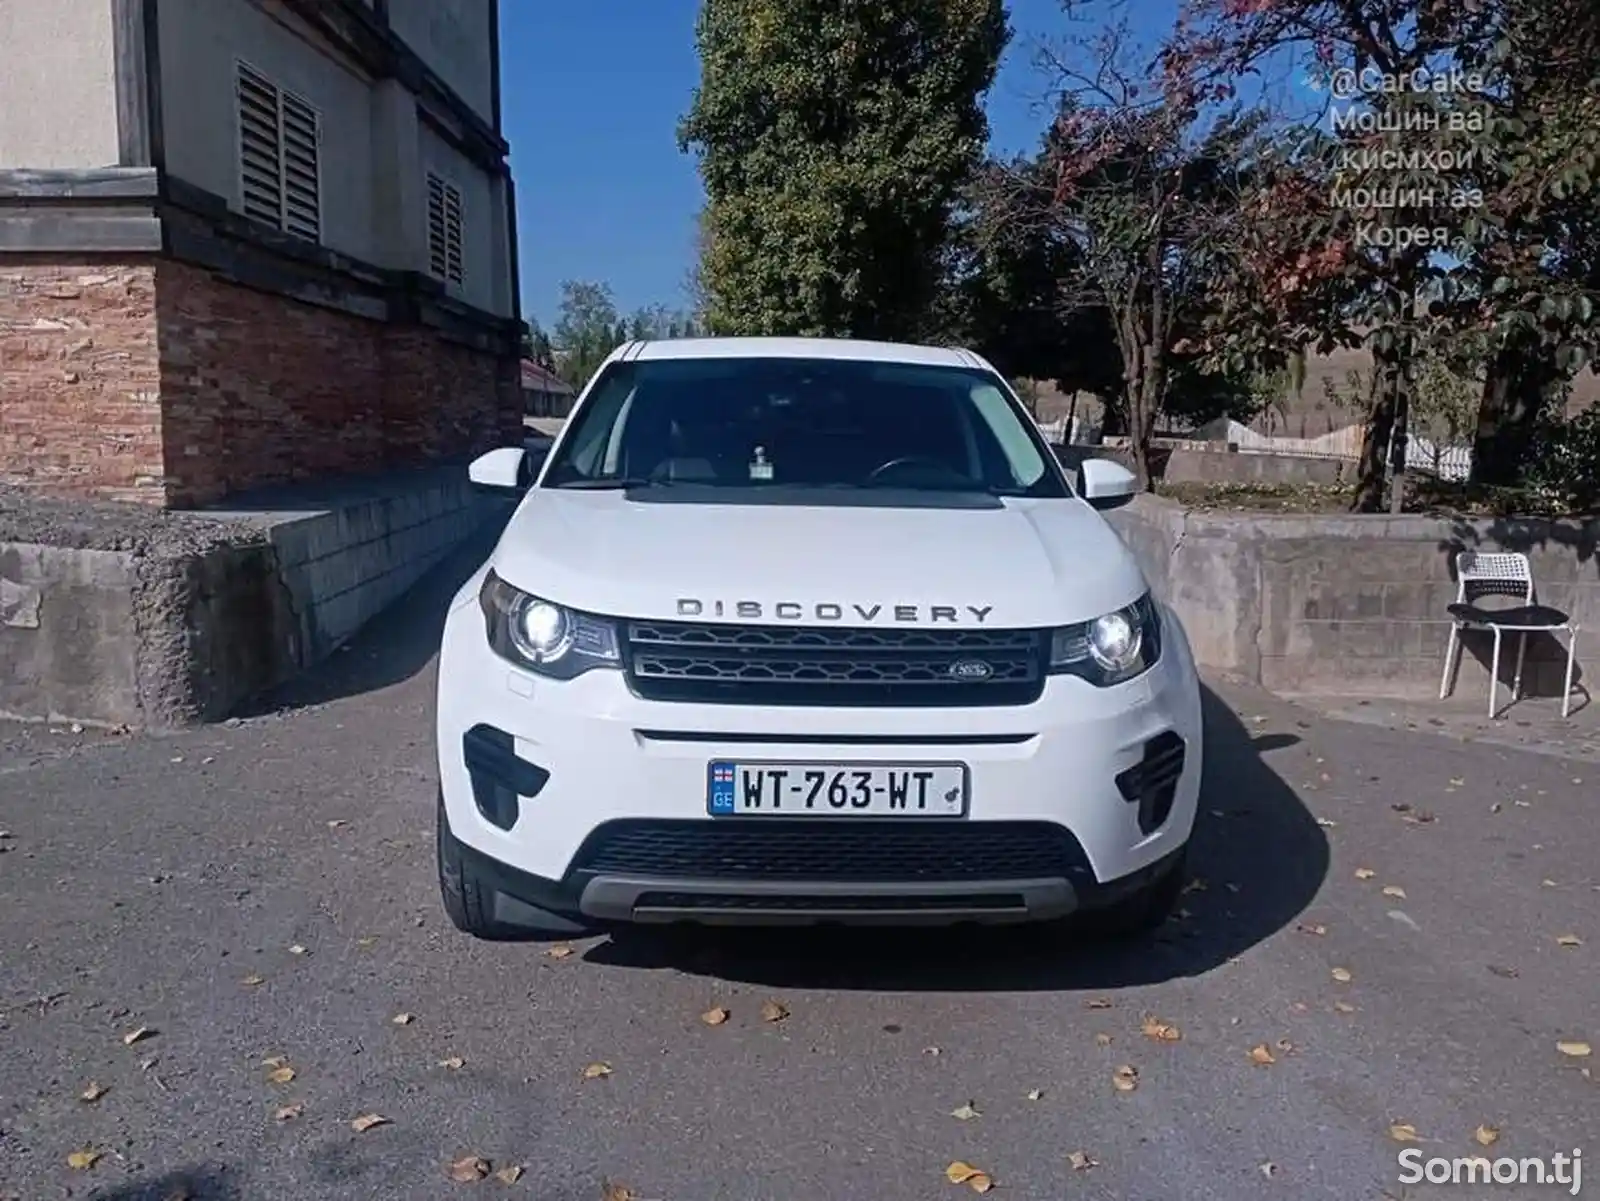 Land Rover Discovery, 2016-1